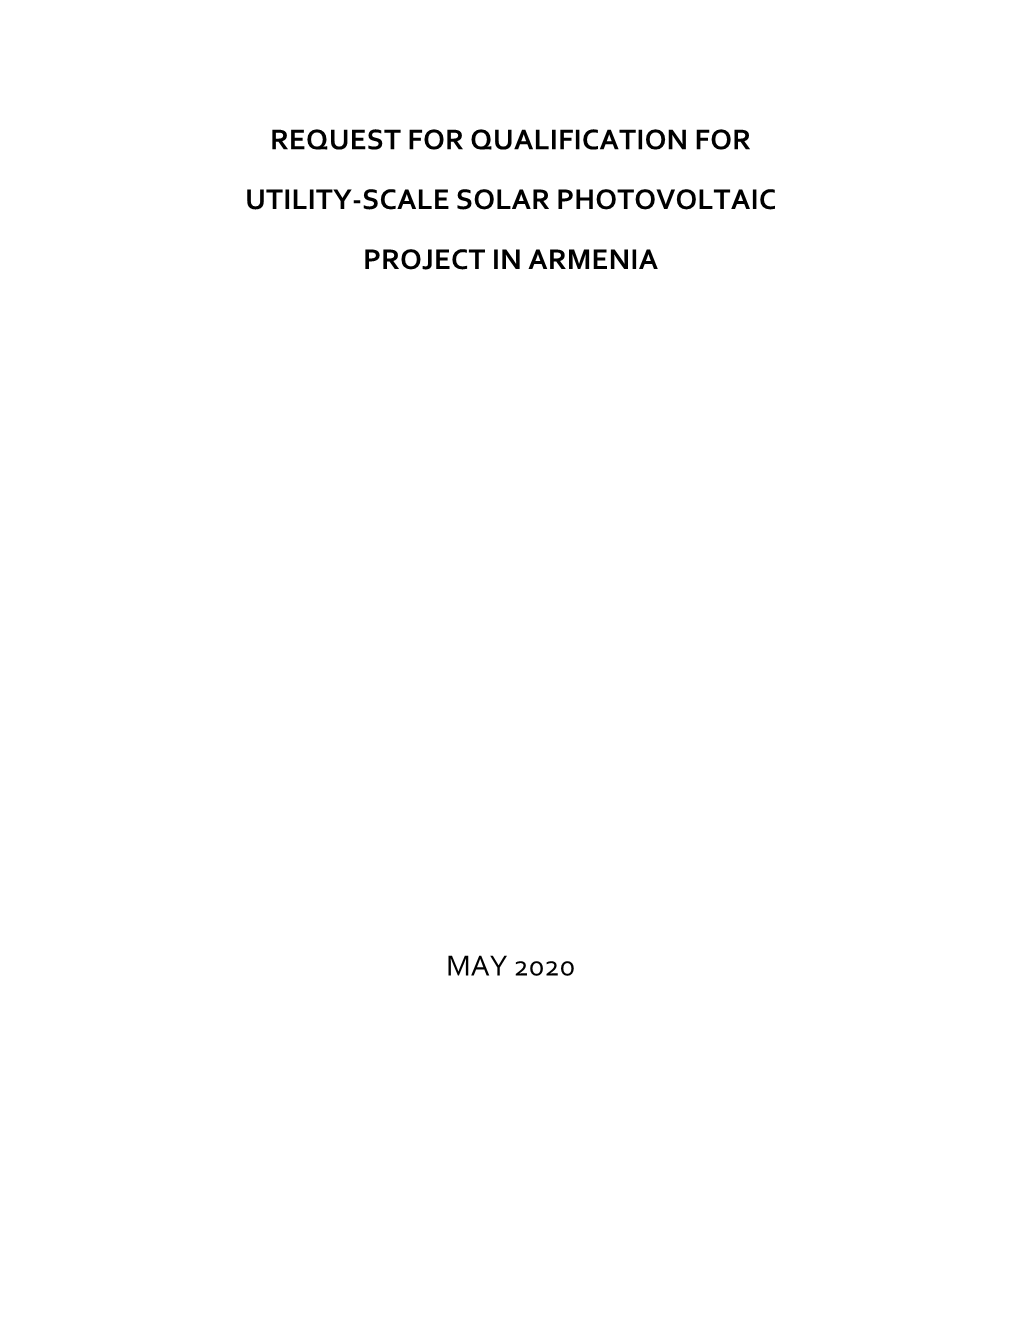 Request for Qualification for Utility-Scale Solar Photovoltaic Project in Armenia